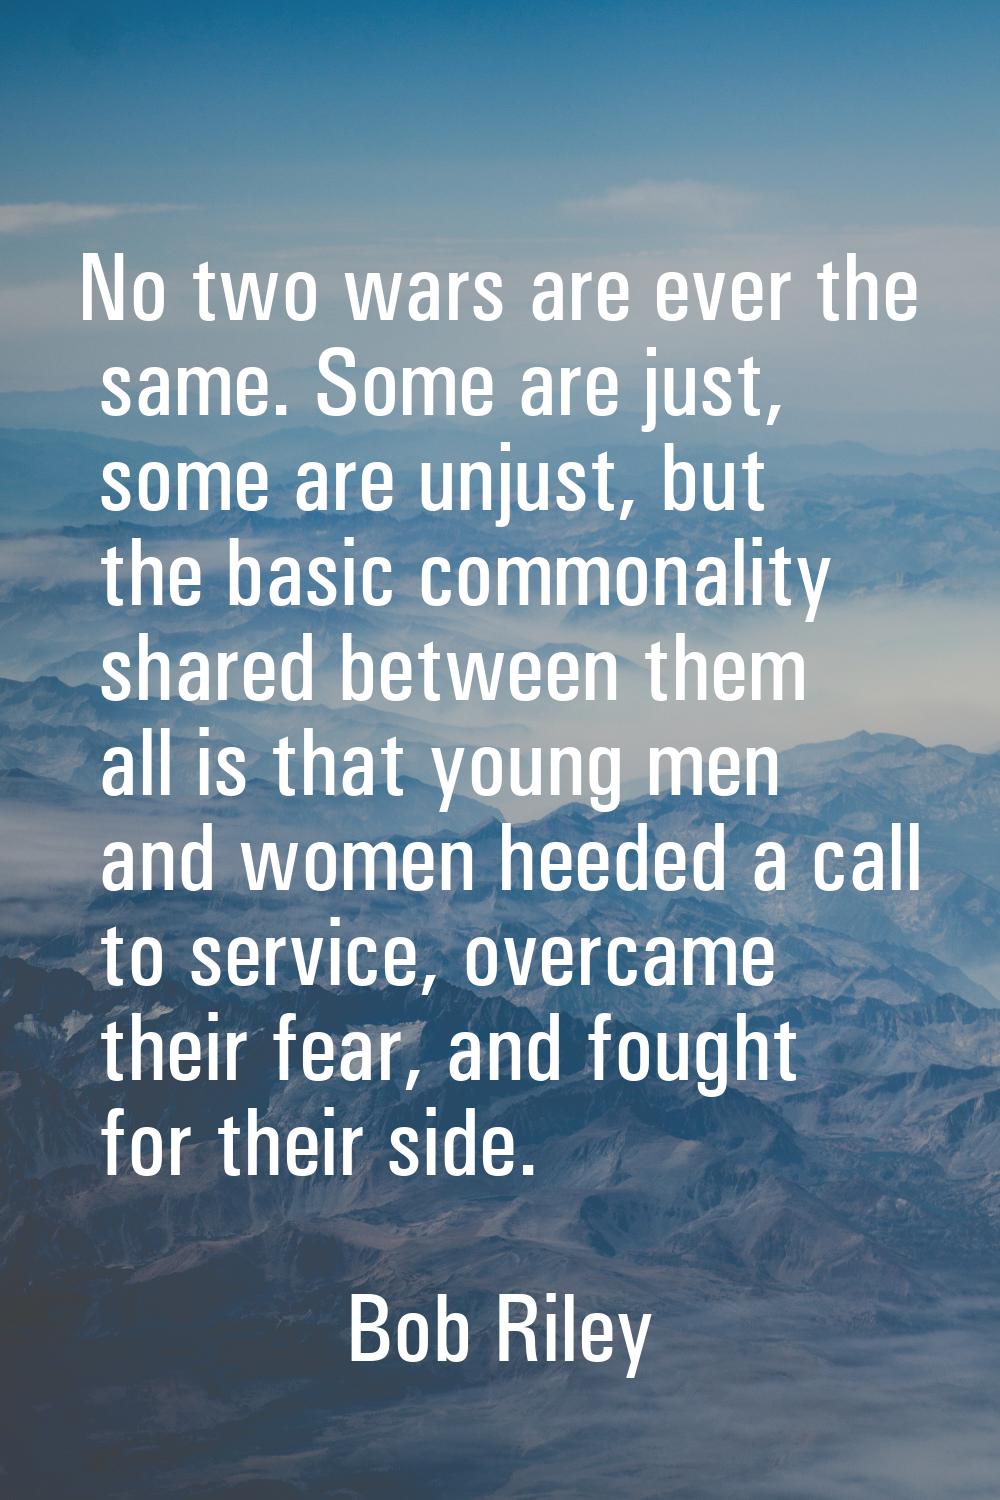 No two wars are ever the same. Some are just, some are unjust, but the basic commonality shared bet